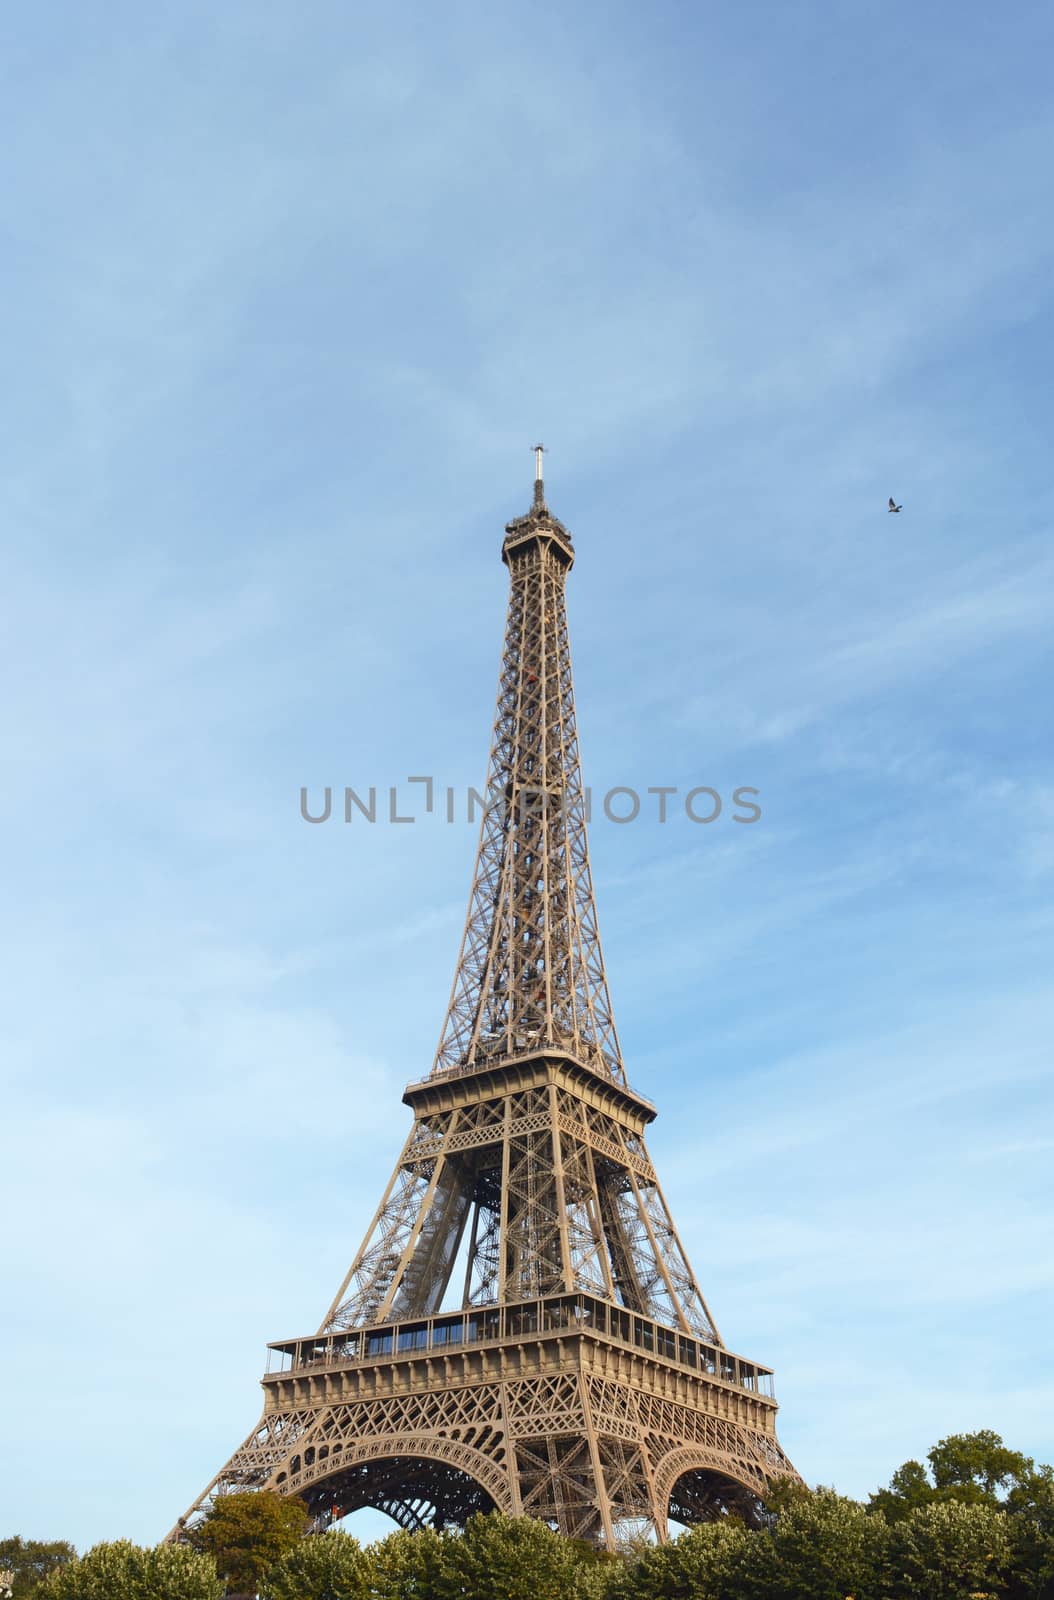 Eiffel Tower landmark stands 324 metres high on the banks of the Seine in Paris, France